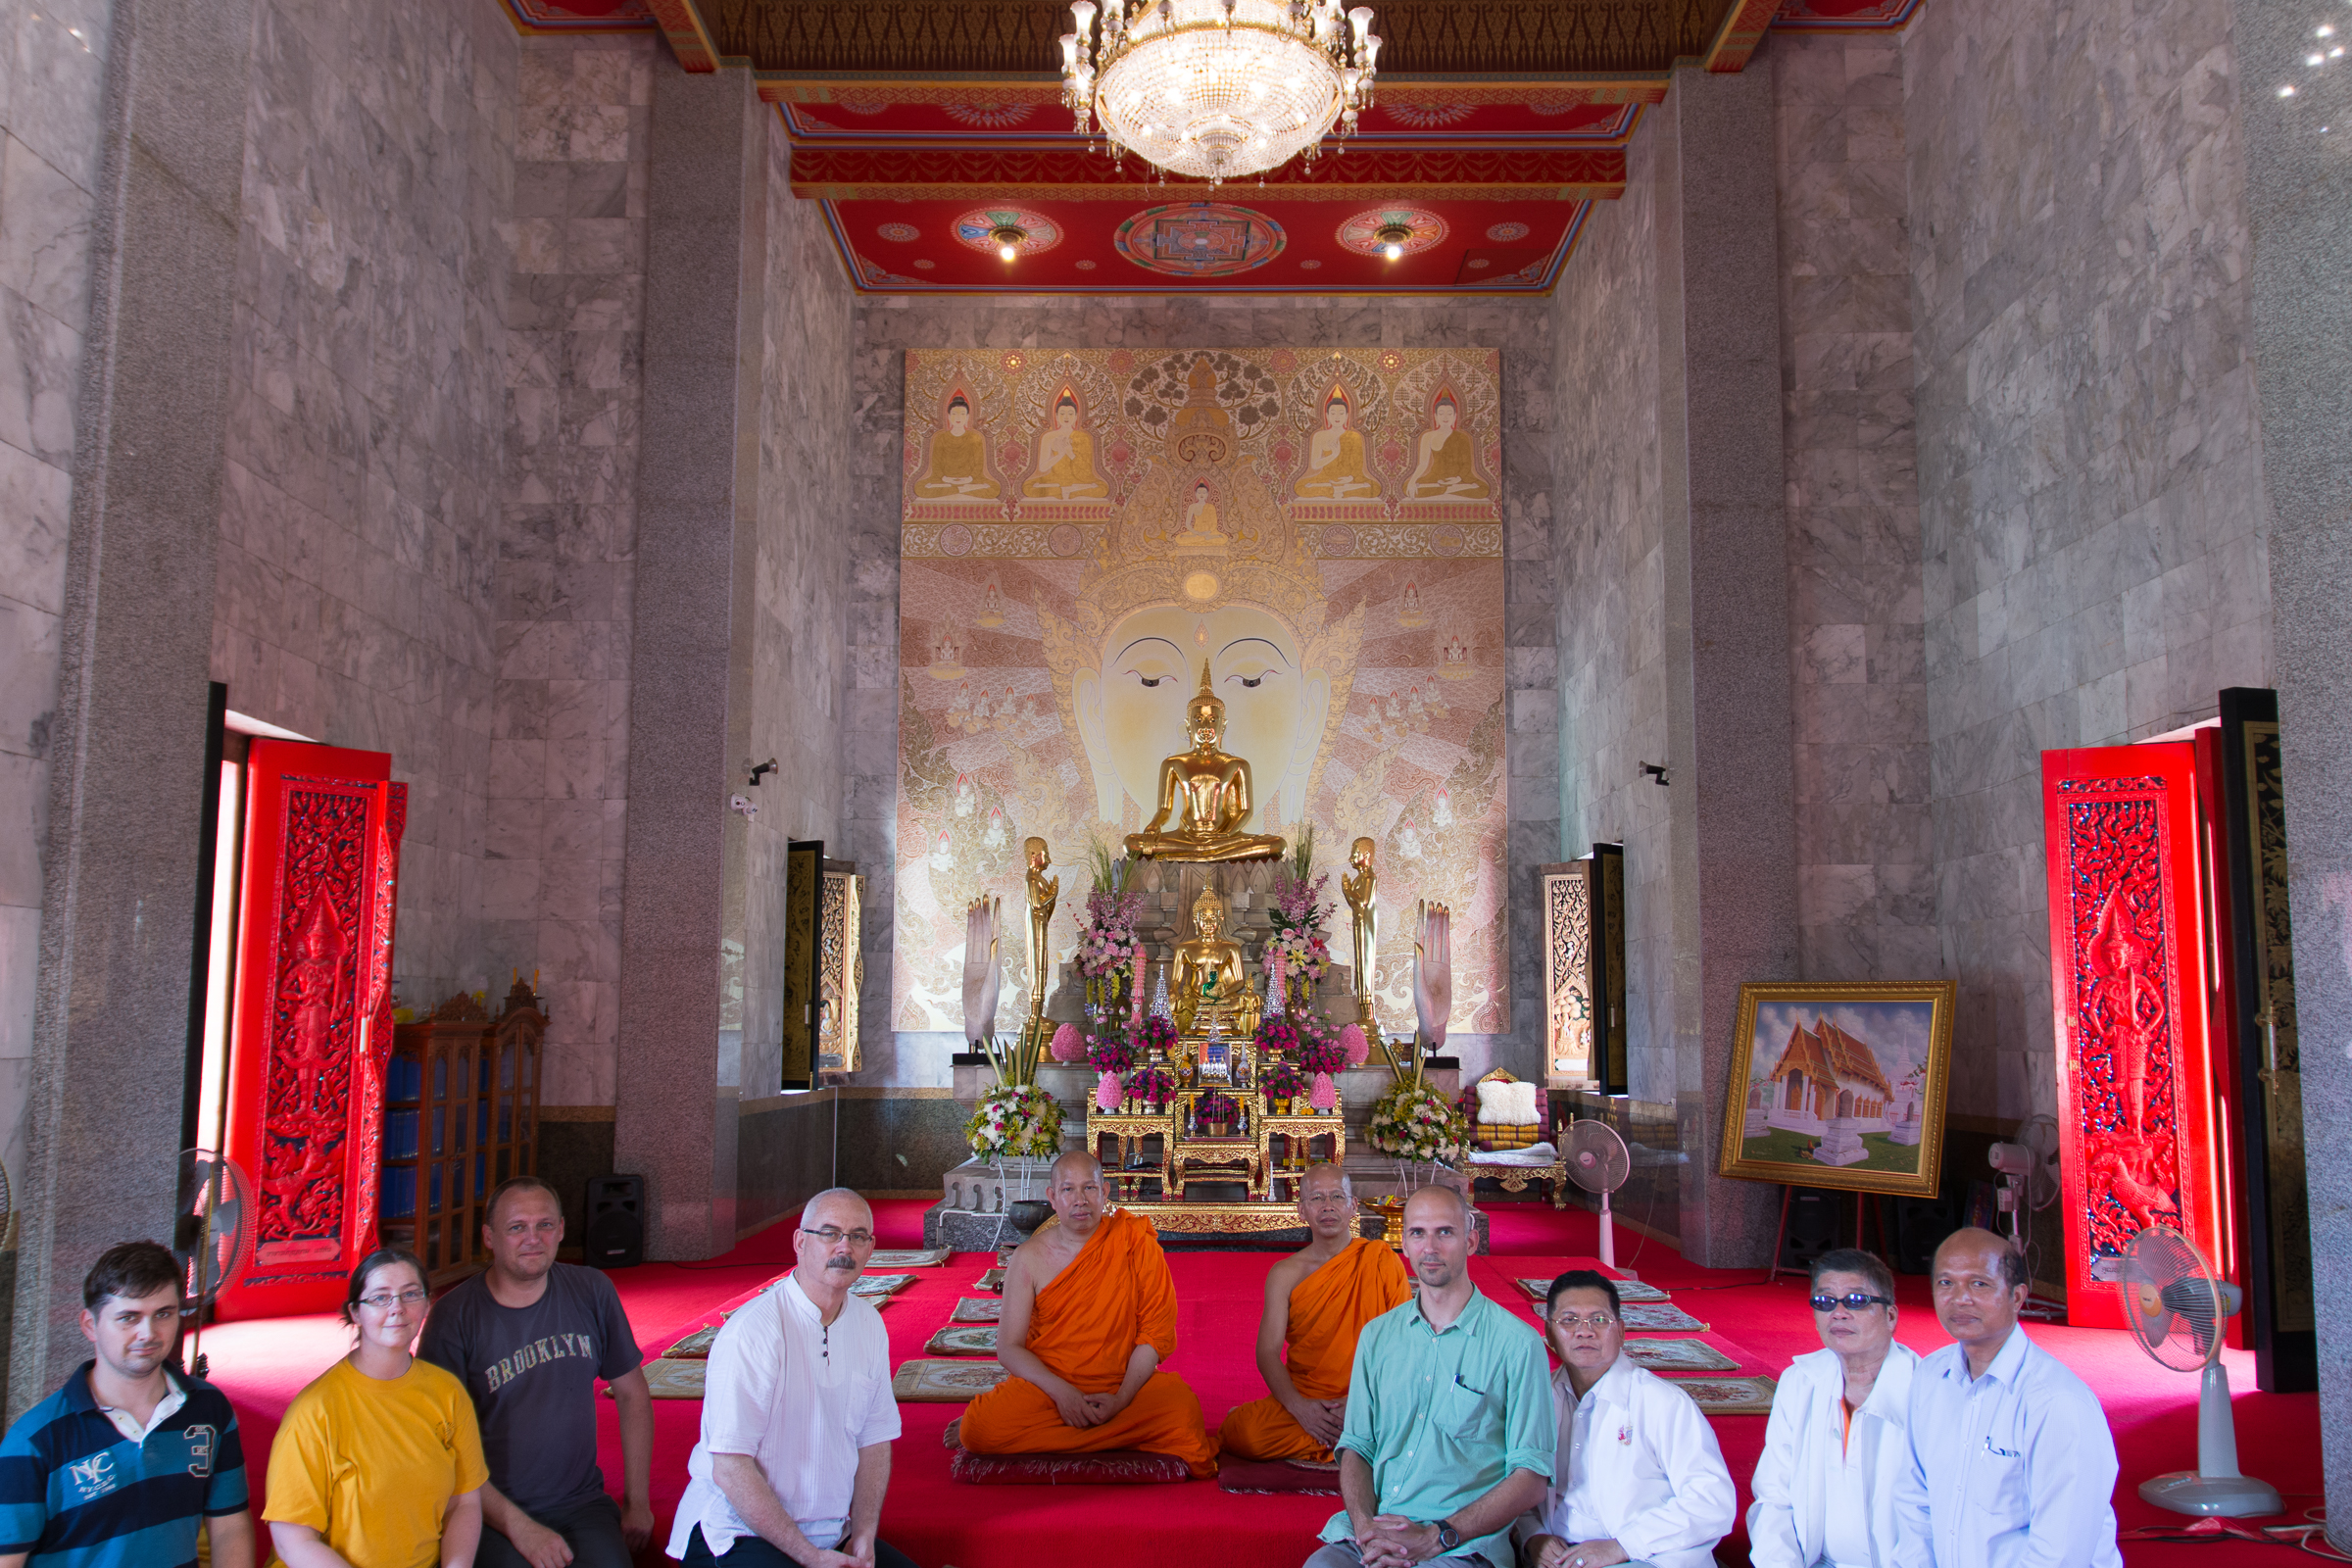 The DGBC delegation were invited by three abbots to visit their monasteries.